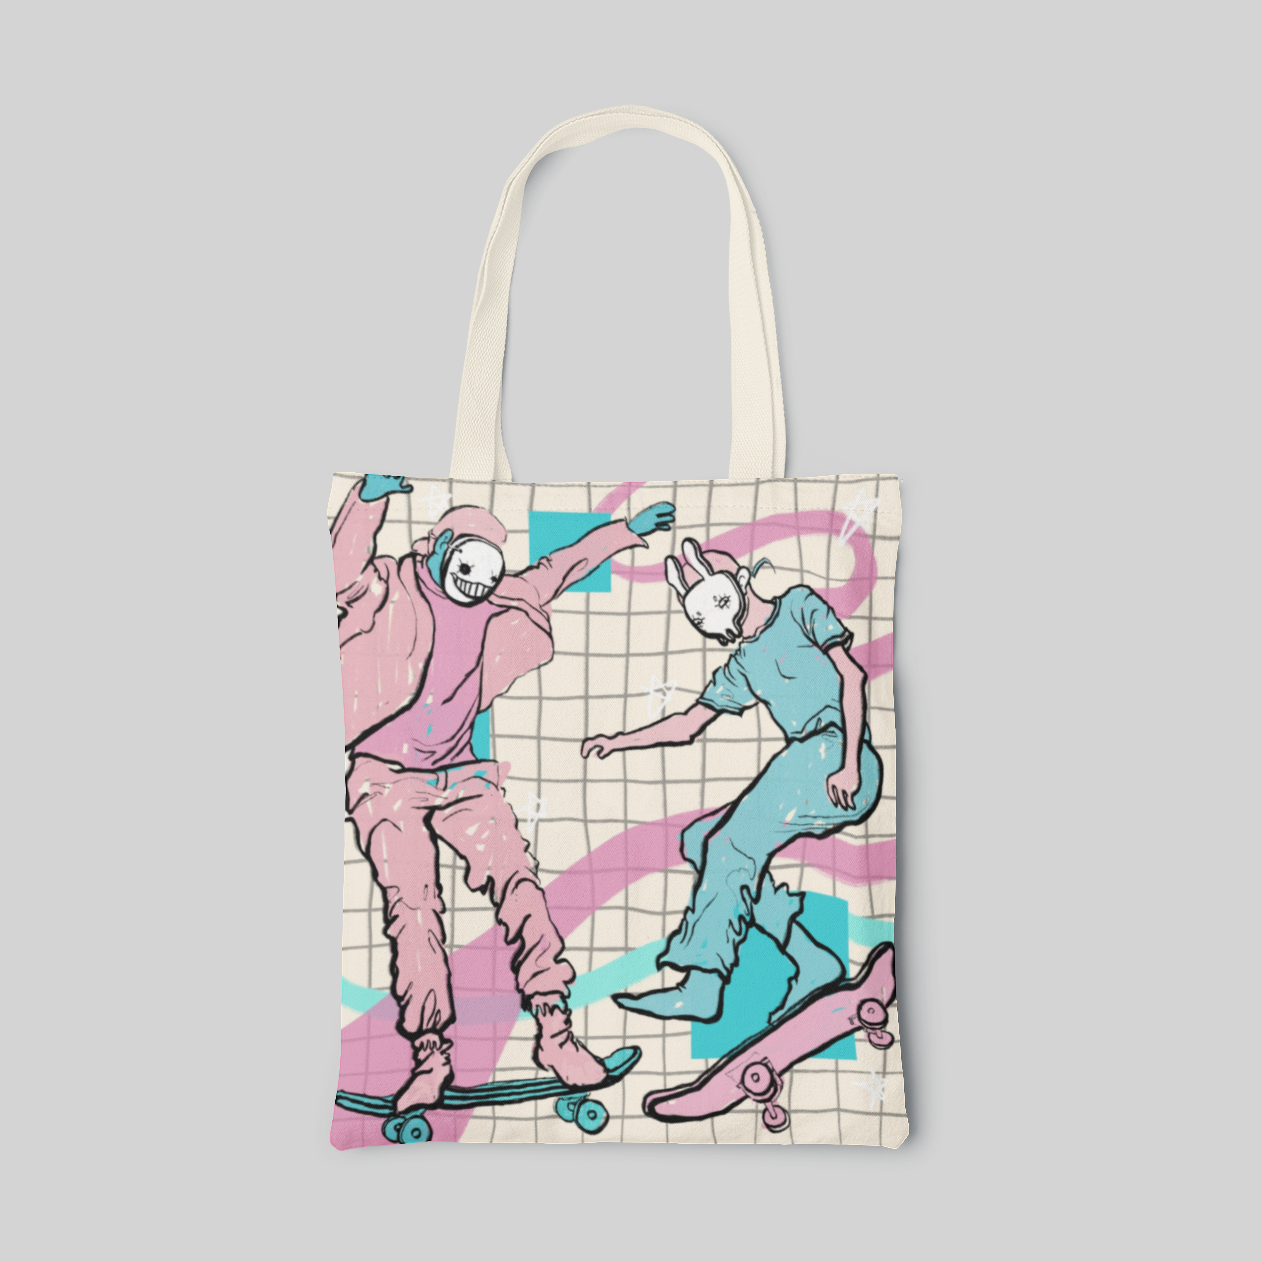 Skater themed lowbrow designed tote bag with inner pockets, front side